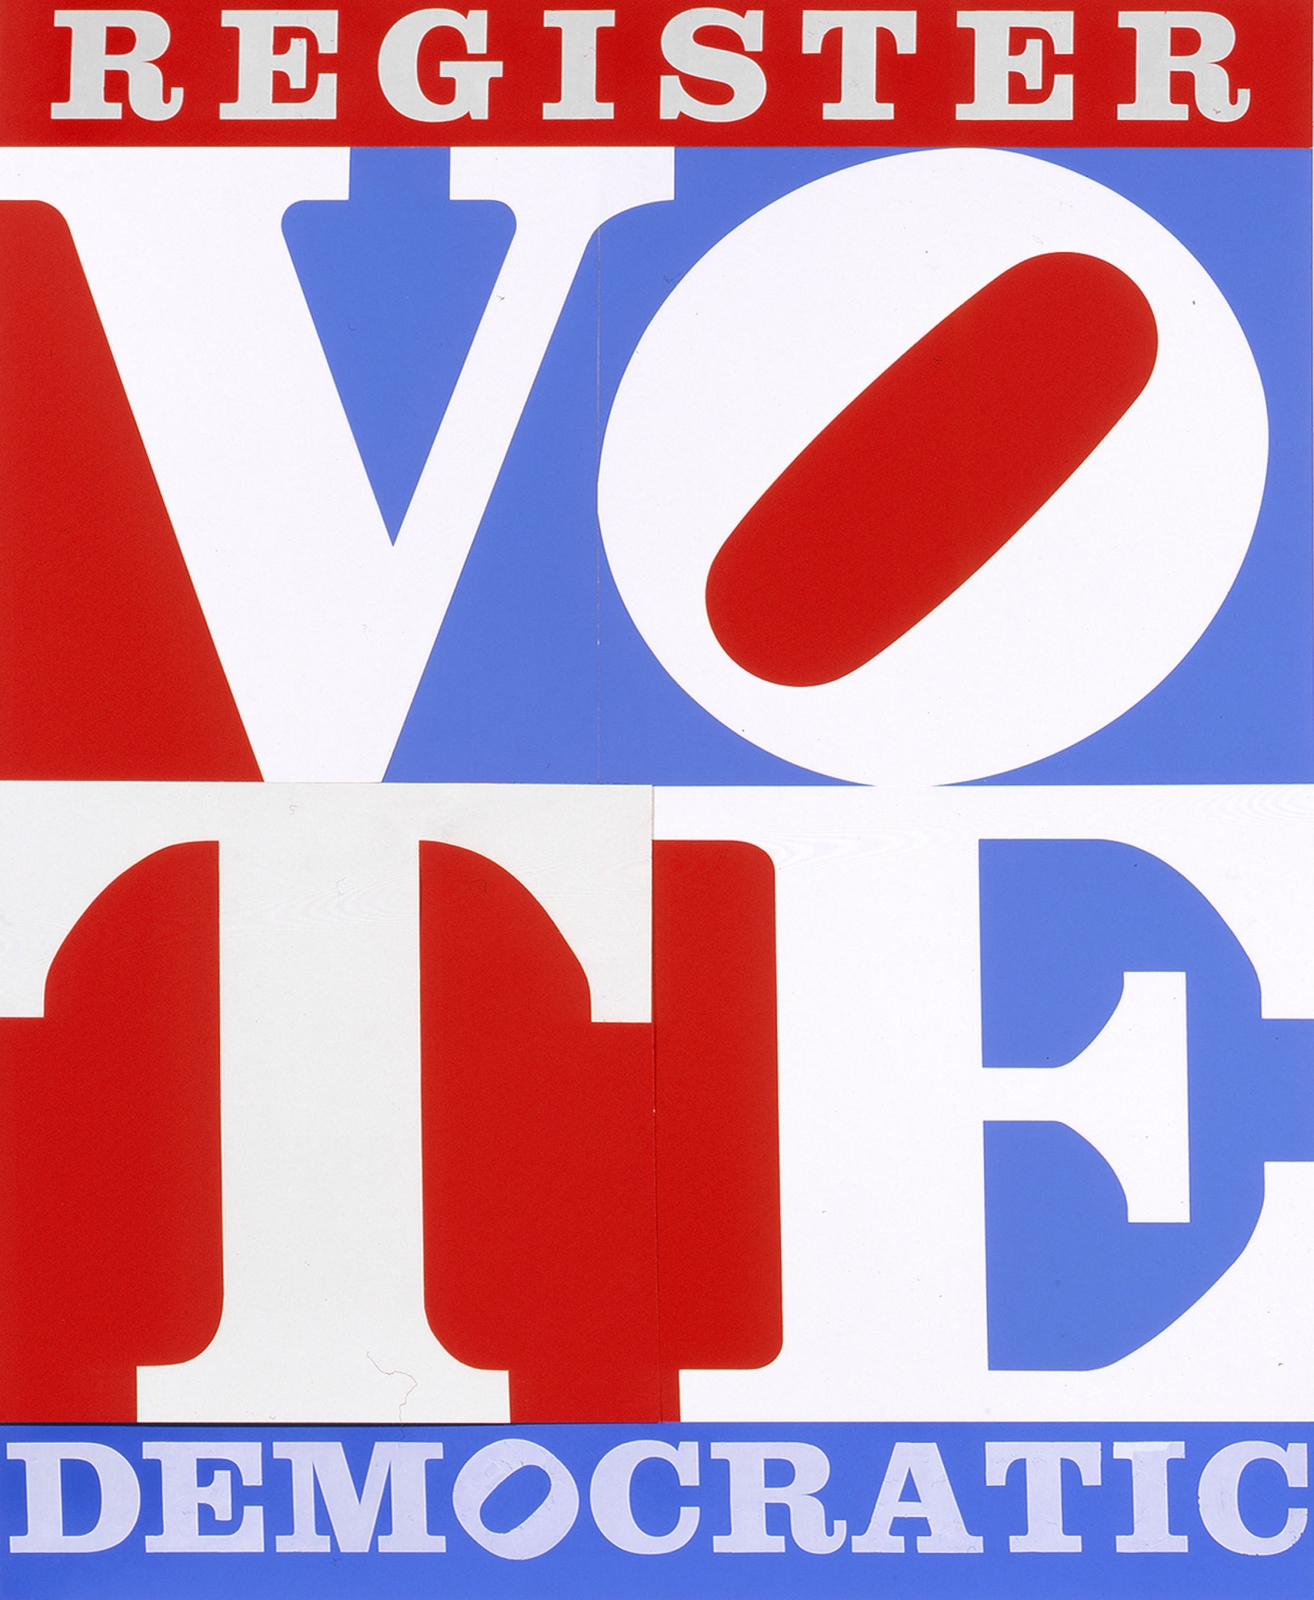 Indiana&#39;s design for VOTE, the poster produced to benefit the Democratic National Committee in 1976. Image courtesy of The Star of Hope, Vinalhaven, Maine